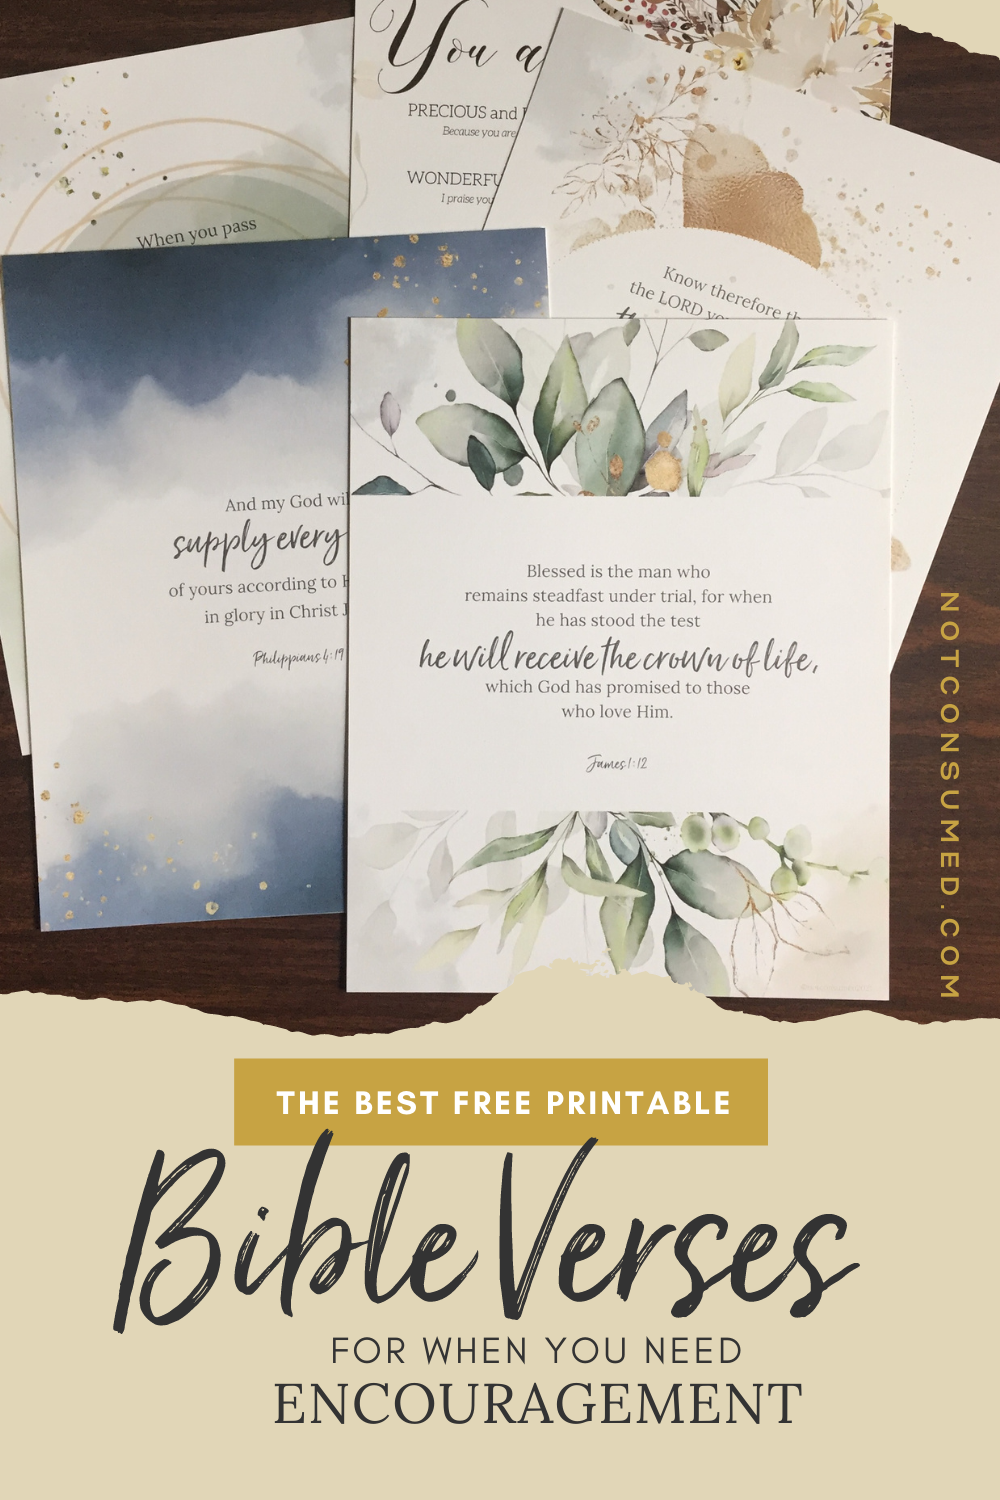 The Best Printable Bible Verses For Encouragement - Free Printable Christian Cards Online